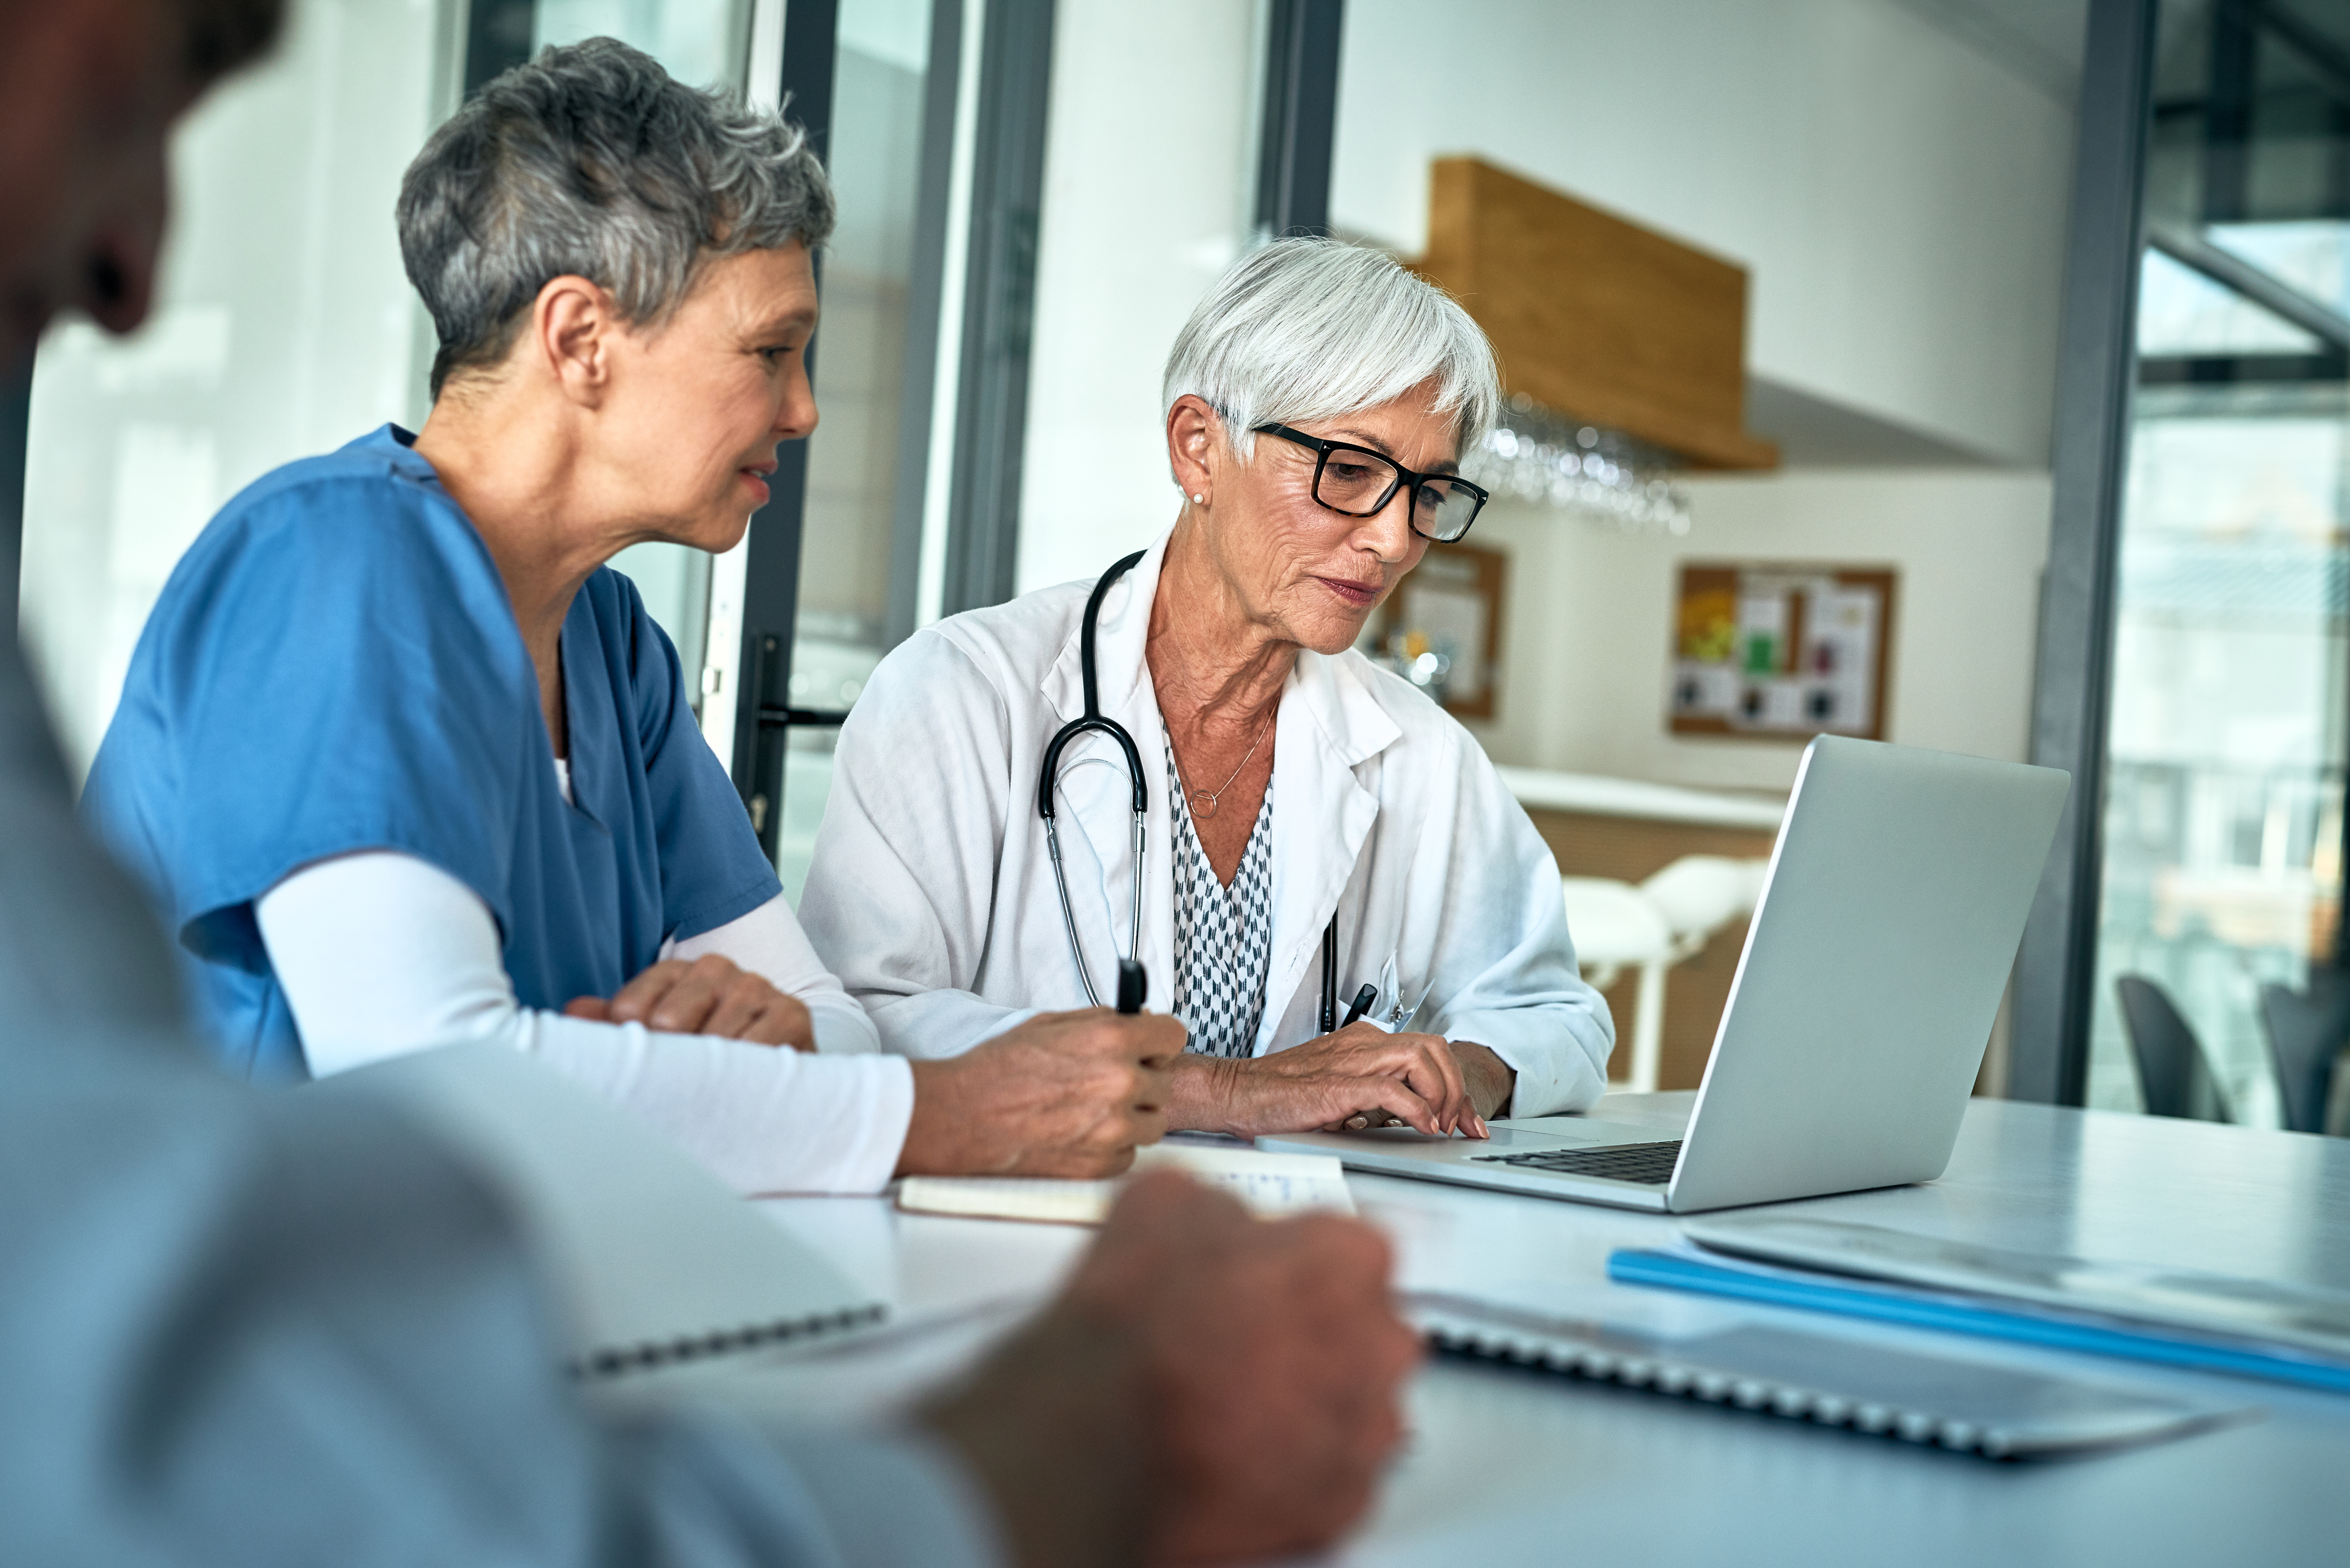 Implementing Value-Based Care With Transitional Care Management (TCM)